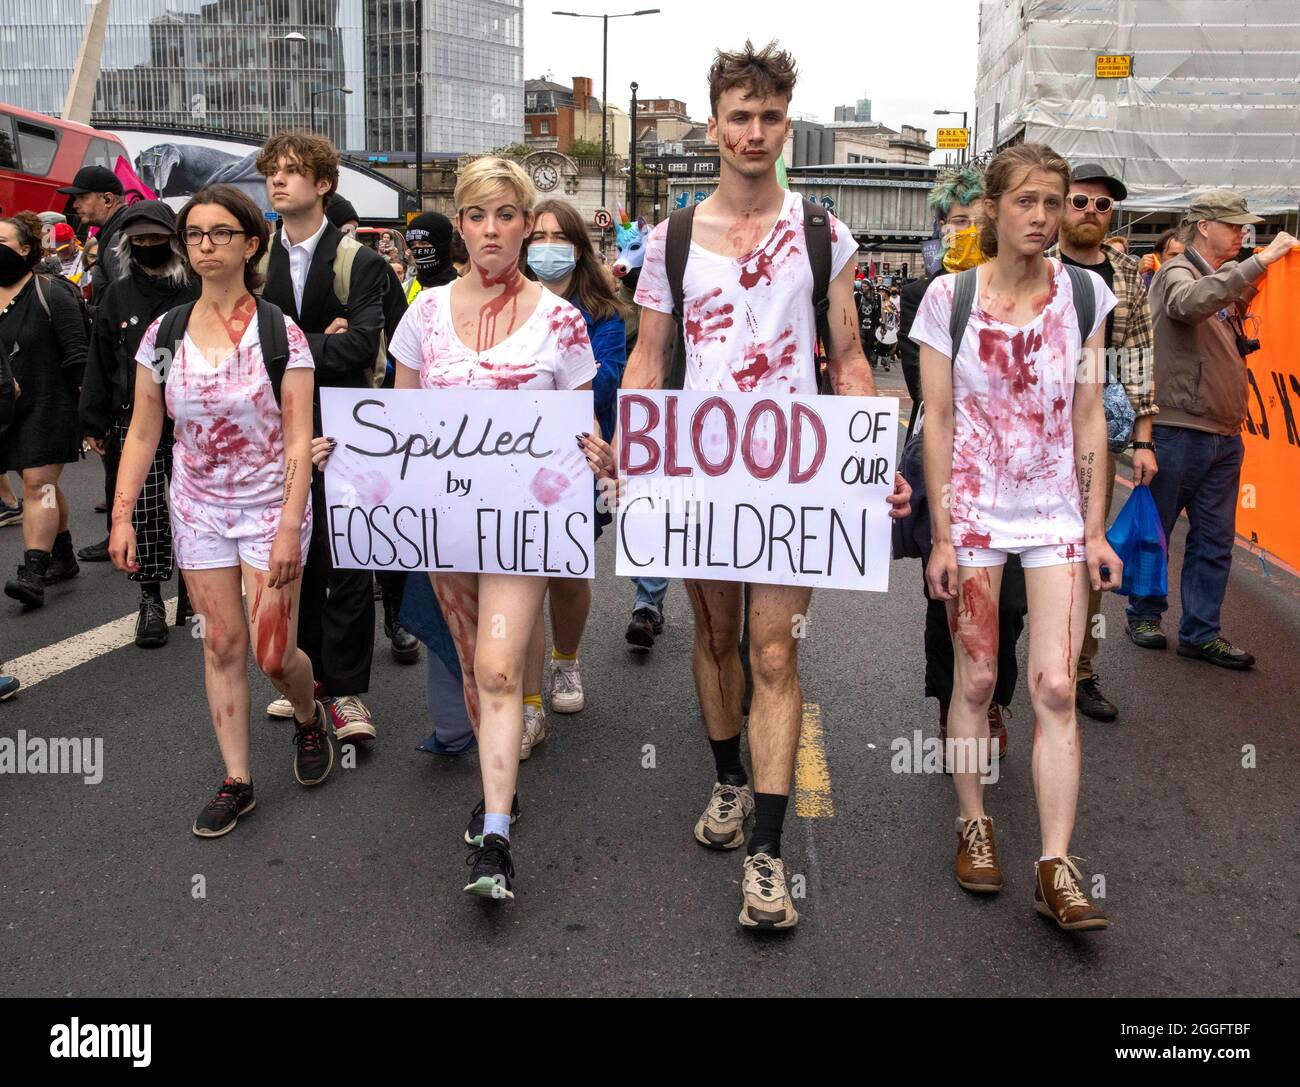 London, UK. 30th Aug, 2021. London, UK 30 8 21 Children on the march smeared in blood. Members of Extinction Rebellion march from The Shard to Tower Bridge where supporters climb on top of a caravan and block the road. Extinction Rebellion Credit: Mark Thomas/Alamy Live News Stock Photo